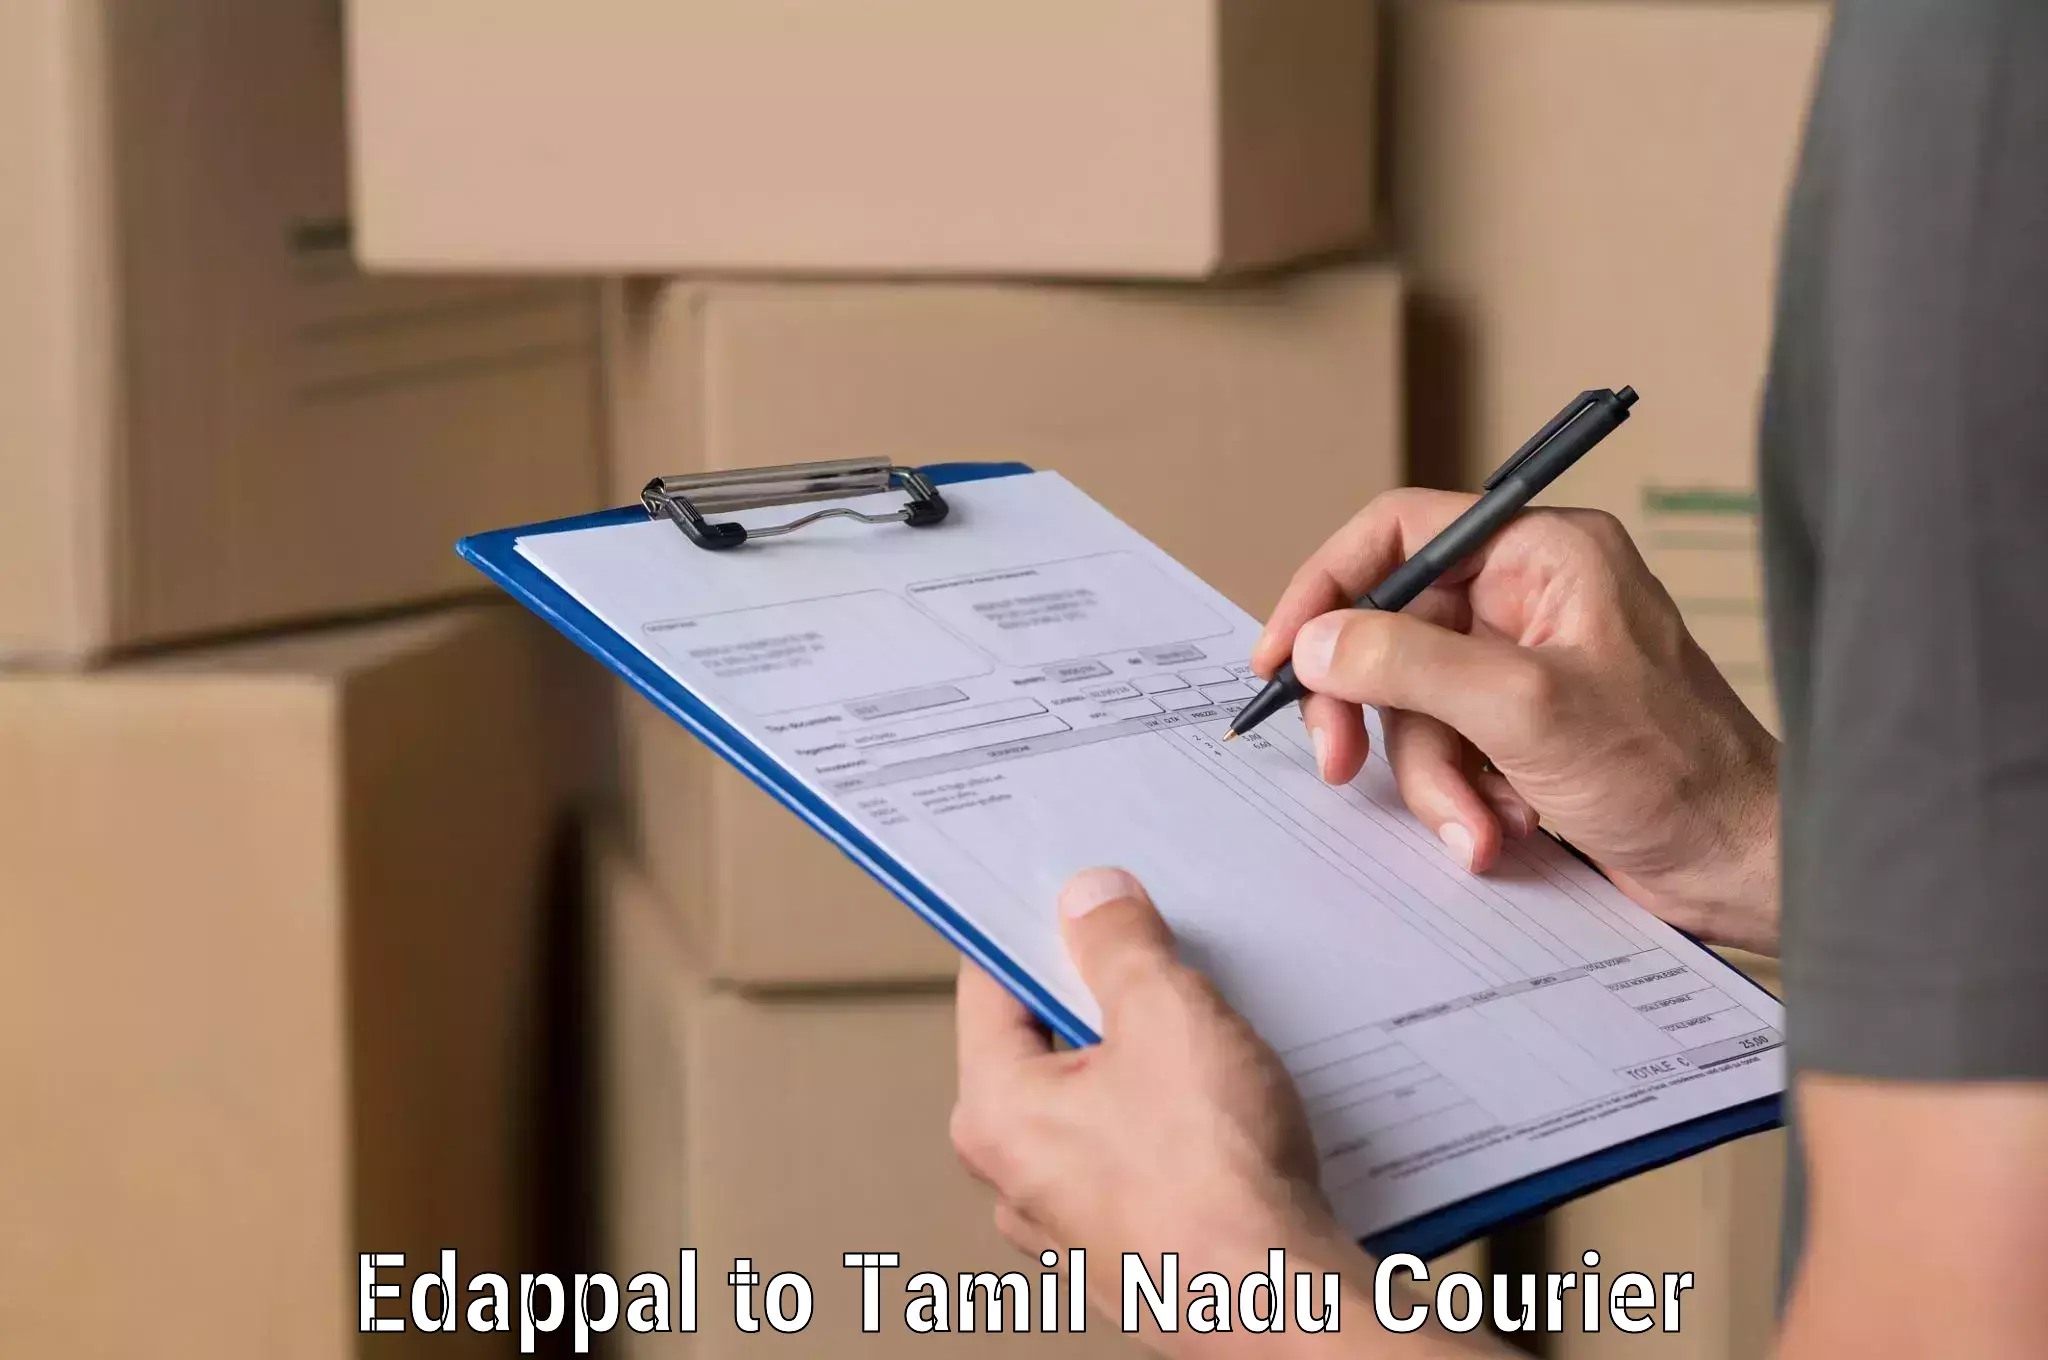 Dynamic courier operations Edappal to Ennore Port Chennai